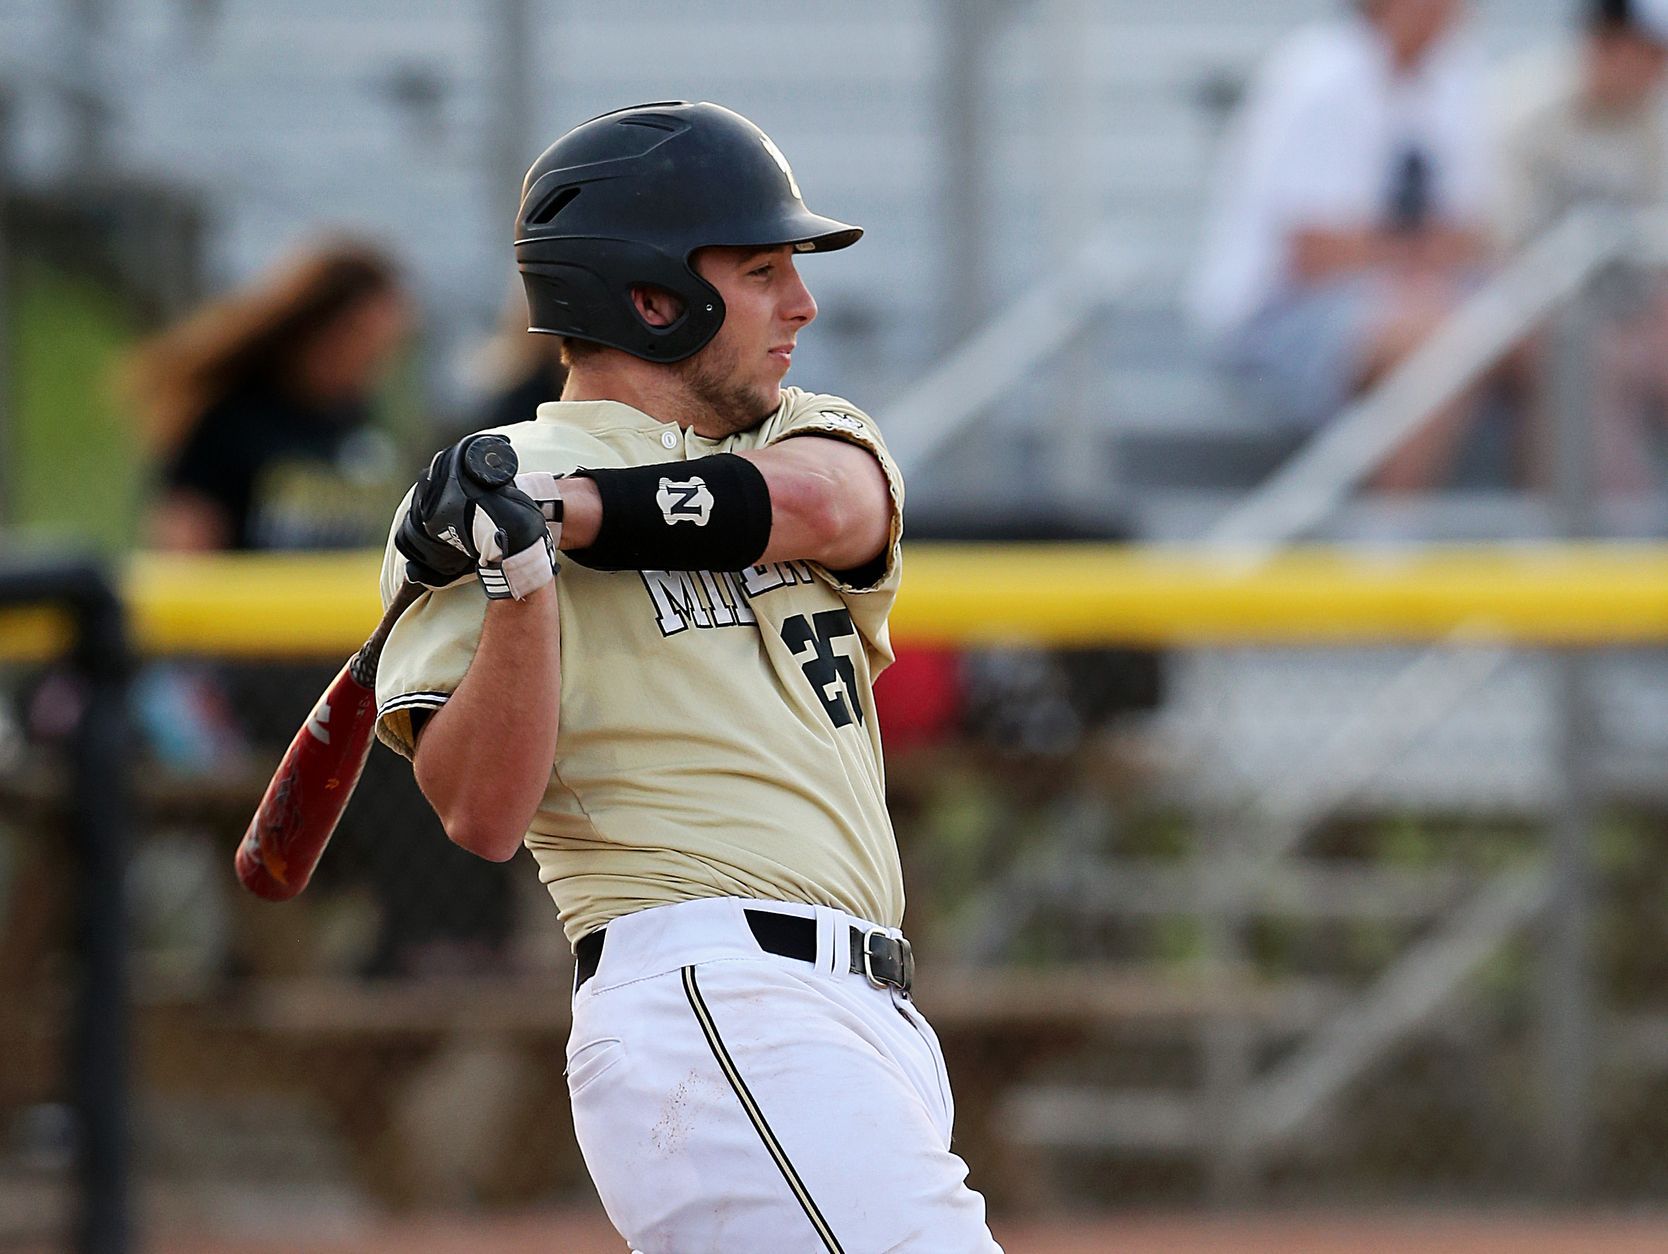 Noblesville's Bryce Masterson (25) bats against Zionsville, at Field of Dreams diamond, April 19, 2016.